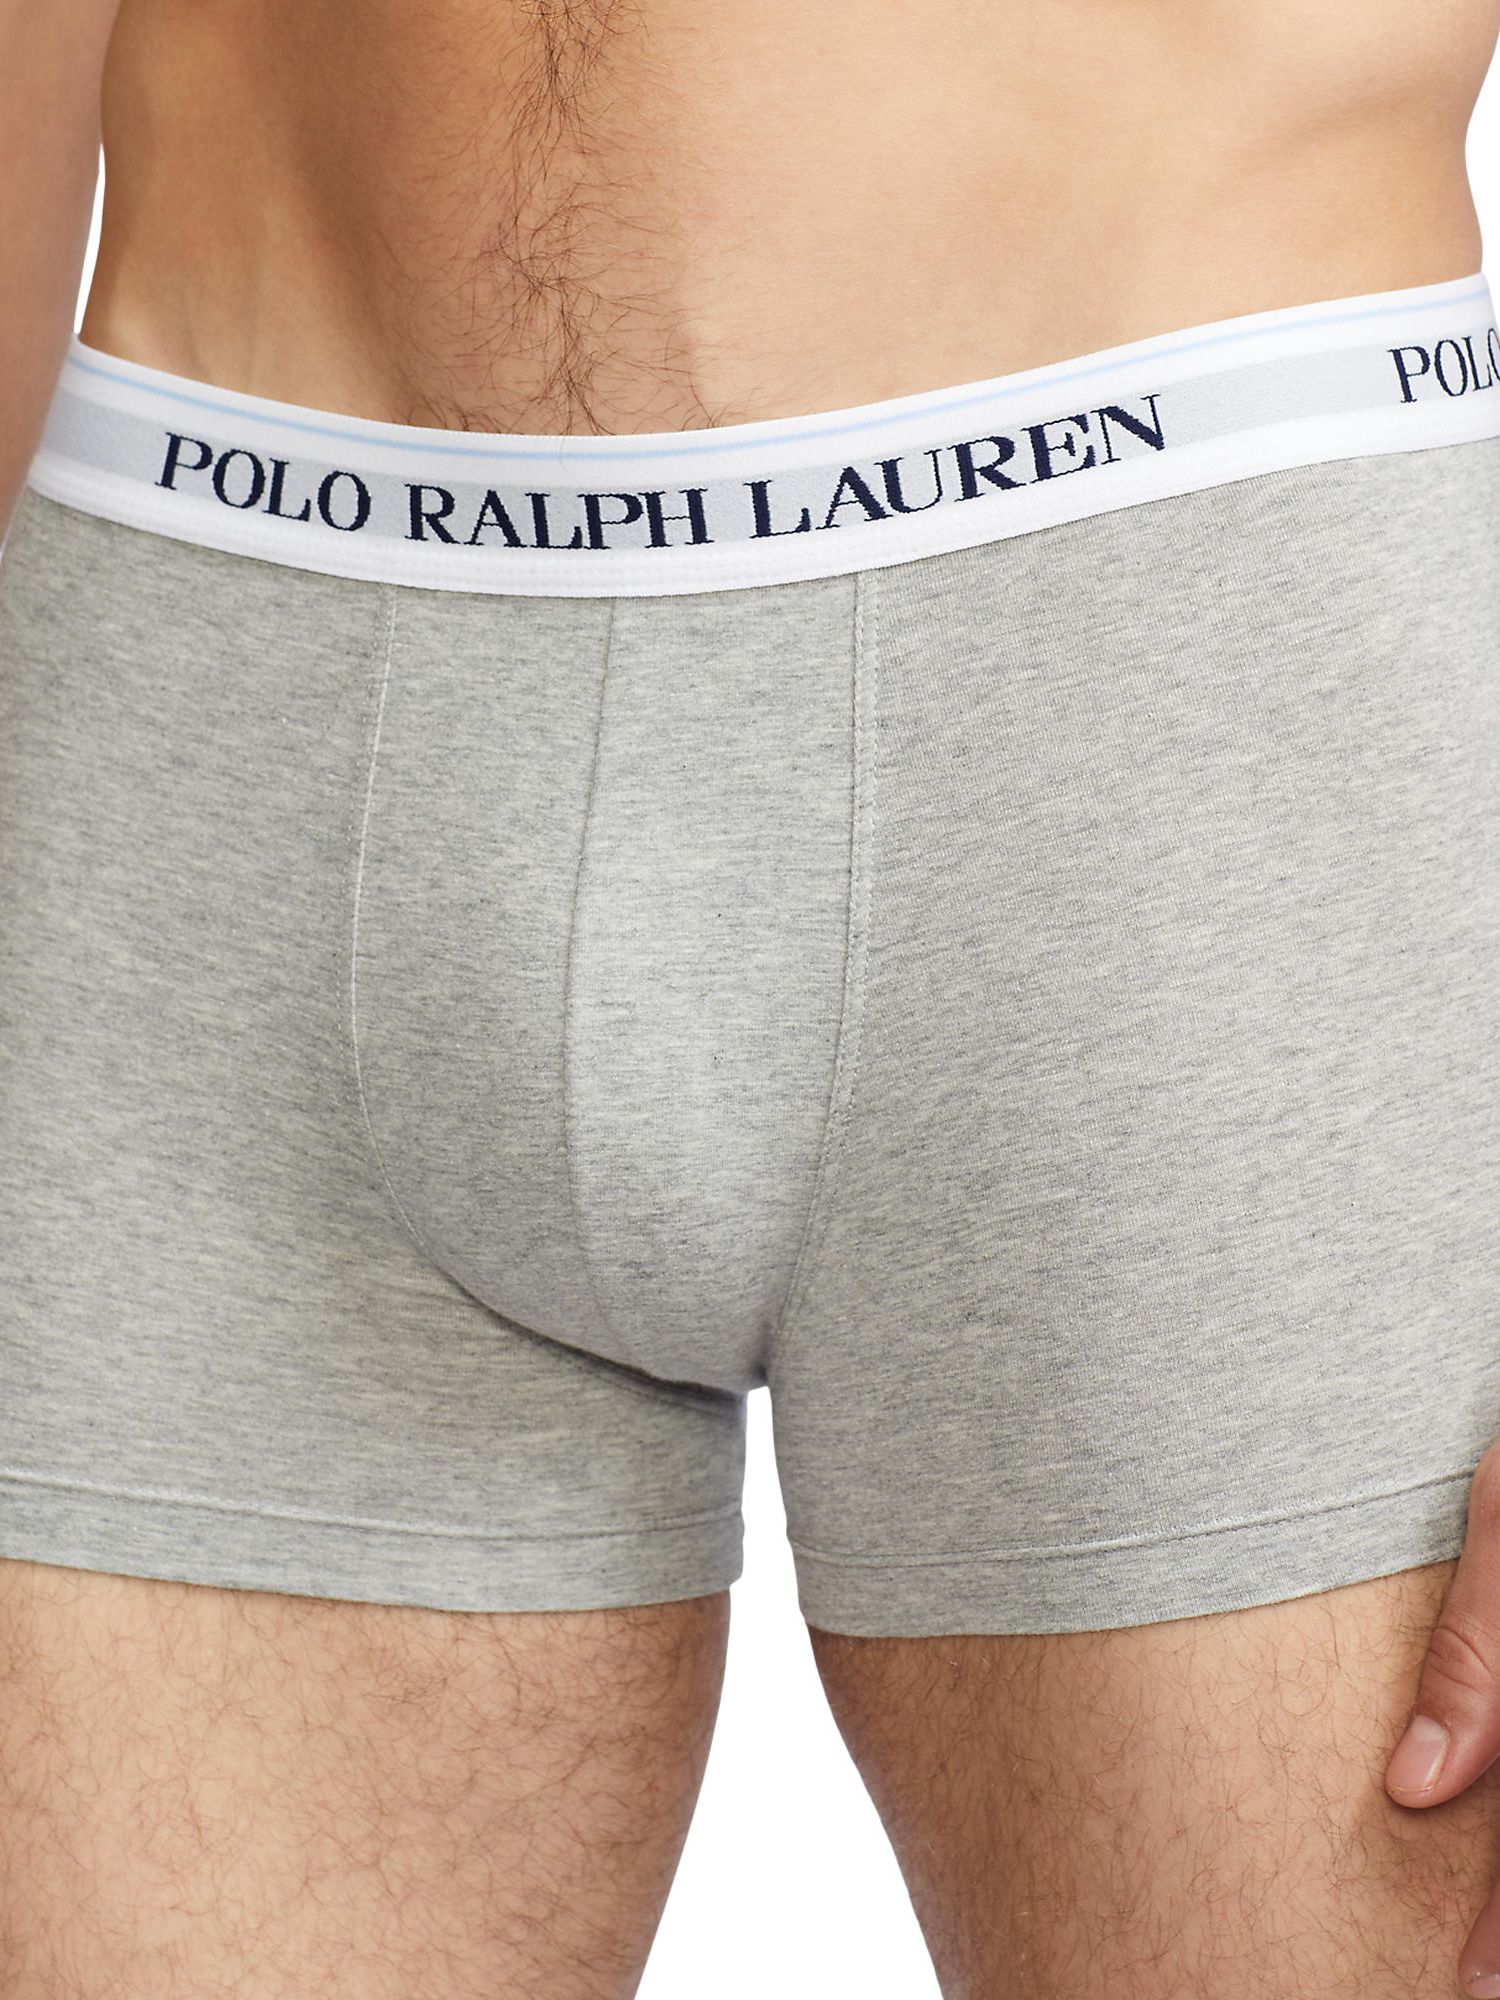 Polo Ralph Lauren Stretch Cotton Trunks, Pack of 3, Grey/Heather/Charcoal  at John Lewis & Partners